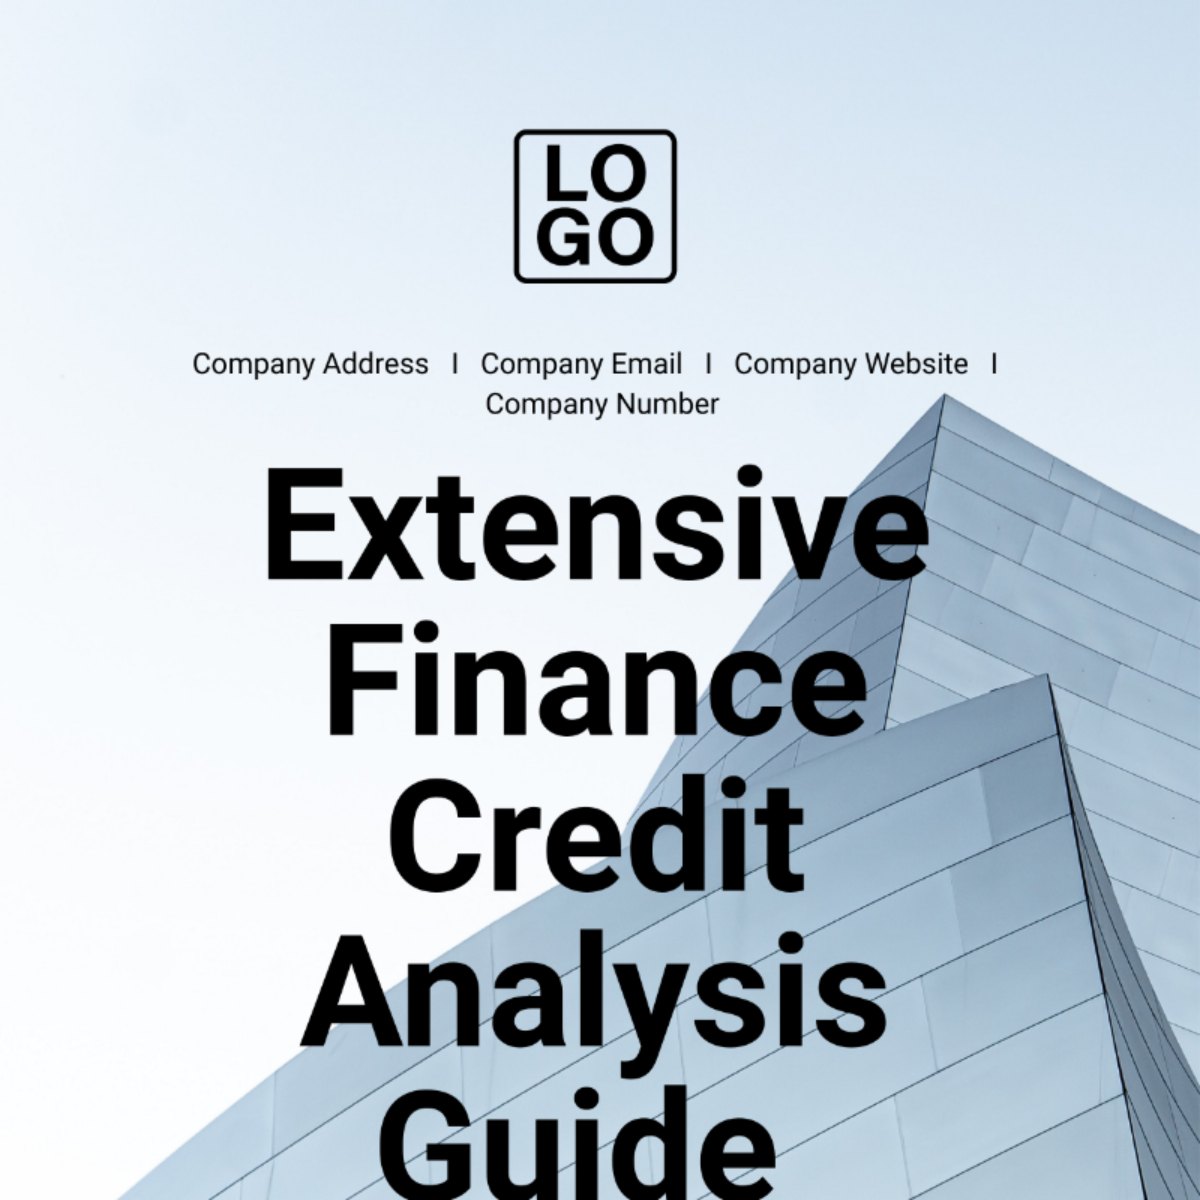 Extensive Finance Credit Analysis Guide Template